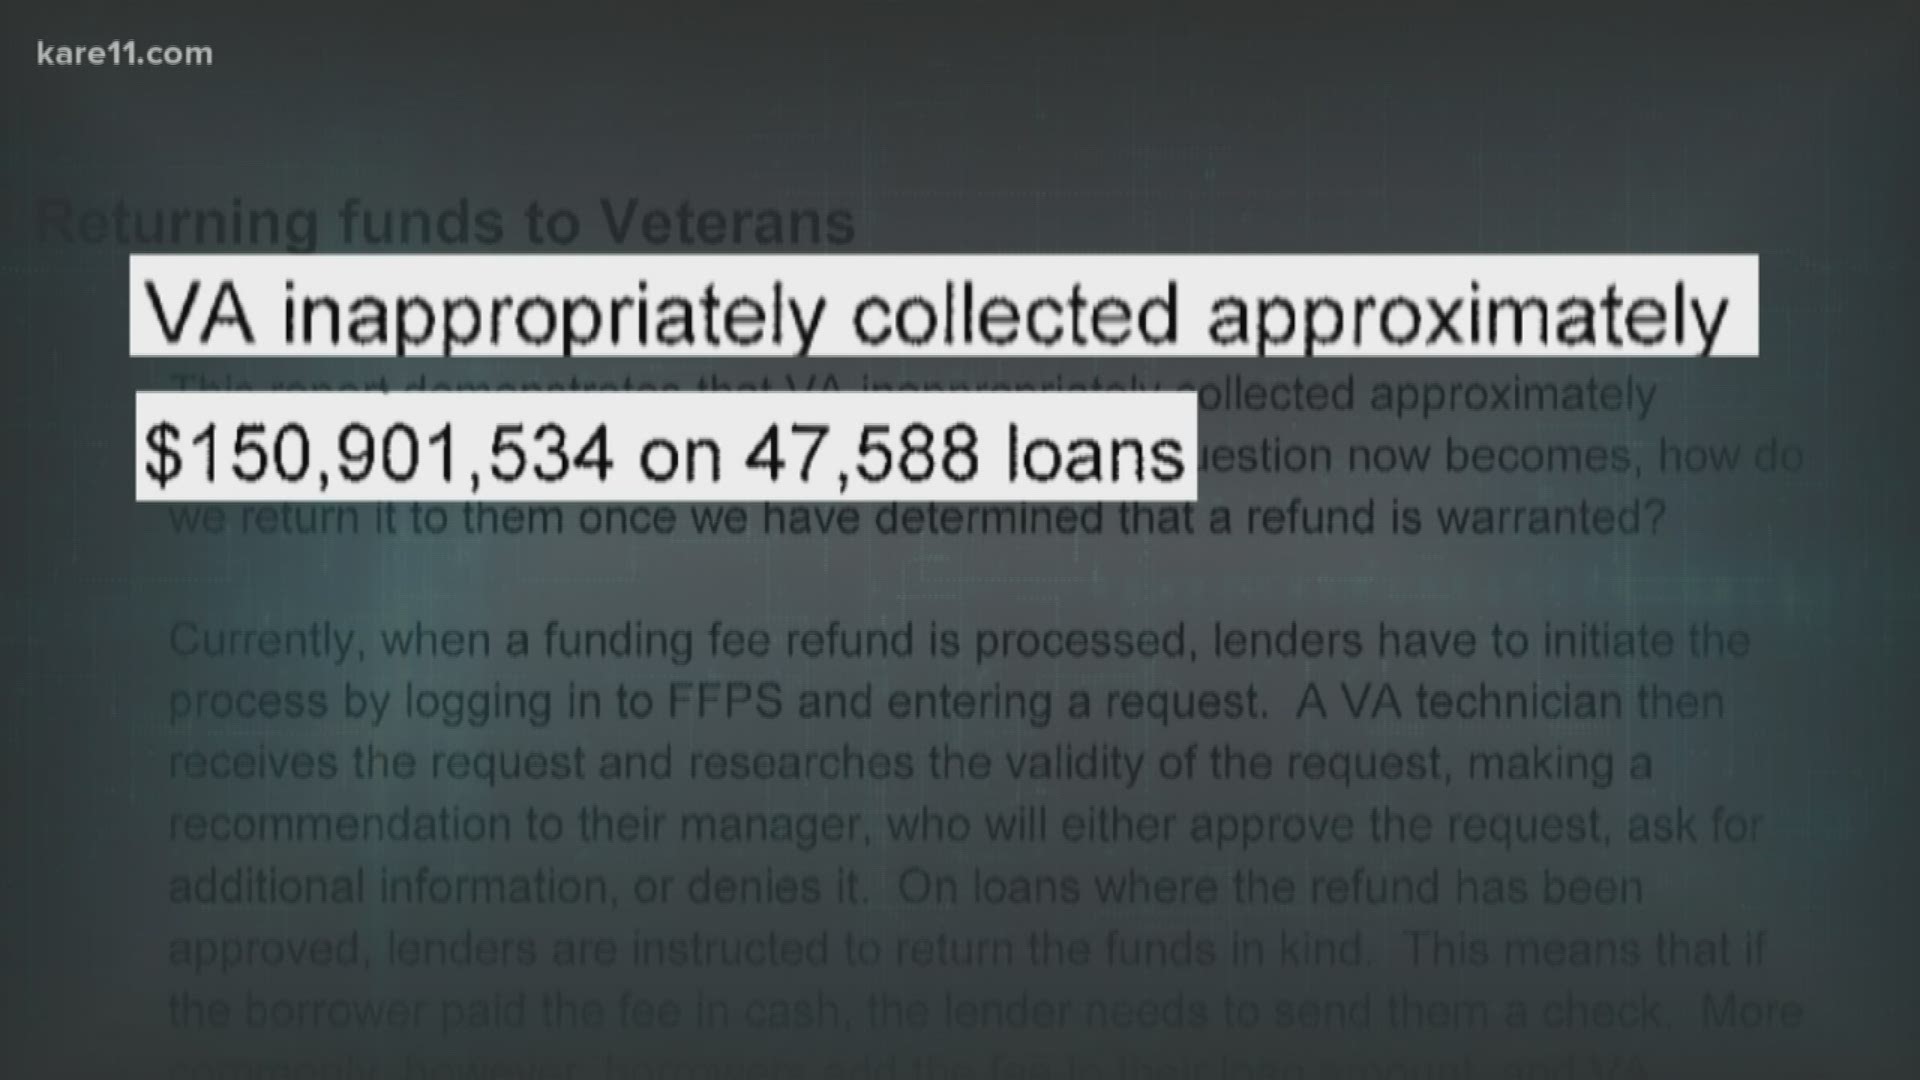 The Department of Veterans Affairs has repaid more than $400 million in home loan refunds to disabled veterans after a scandal exposed by a KARE 11 investigation.